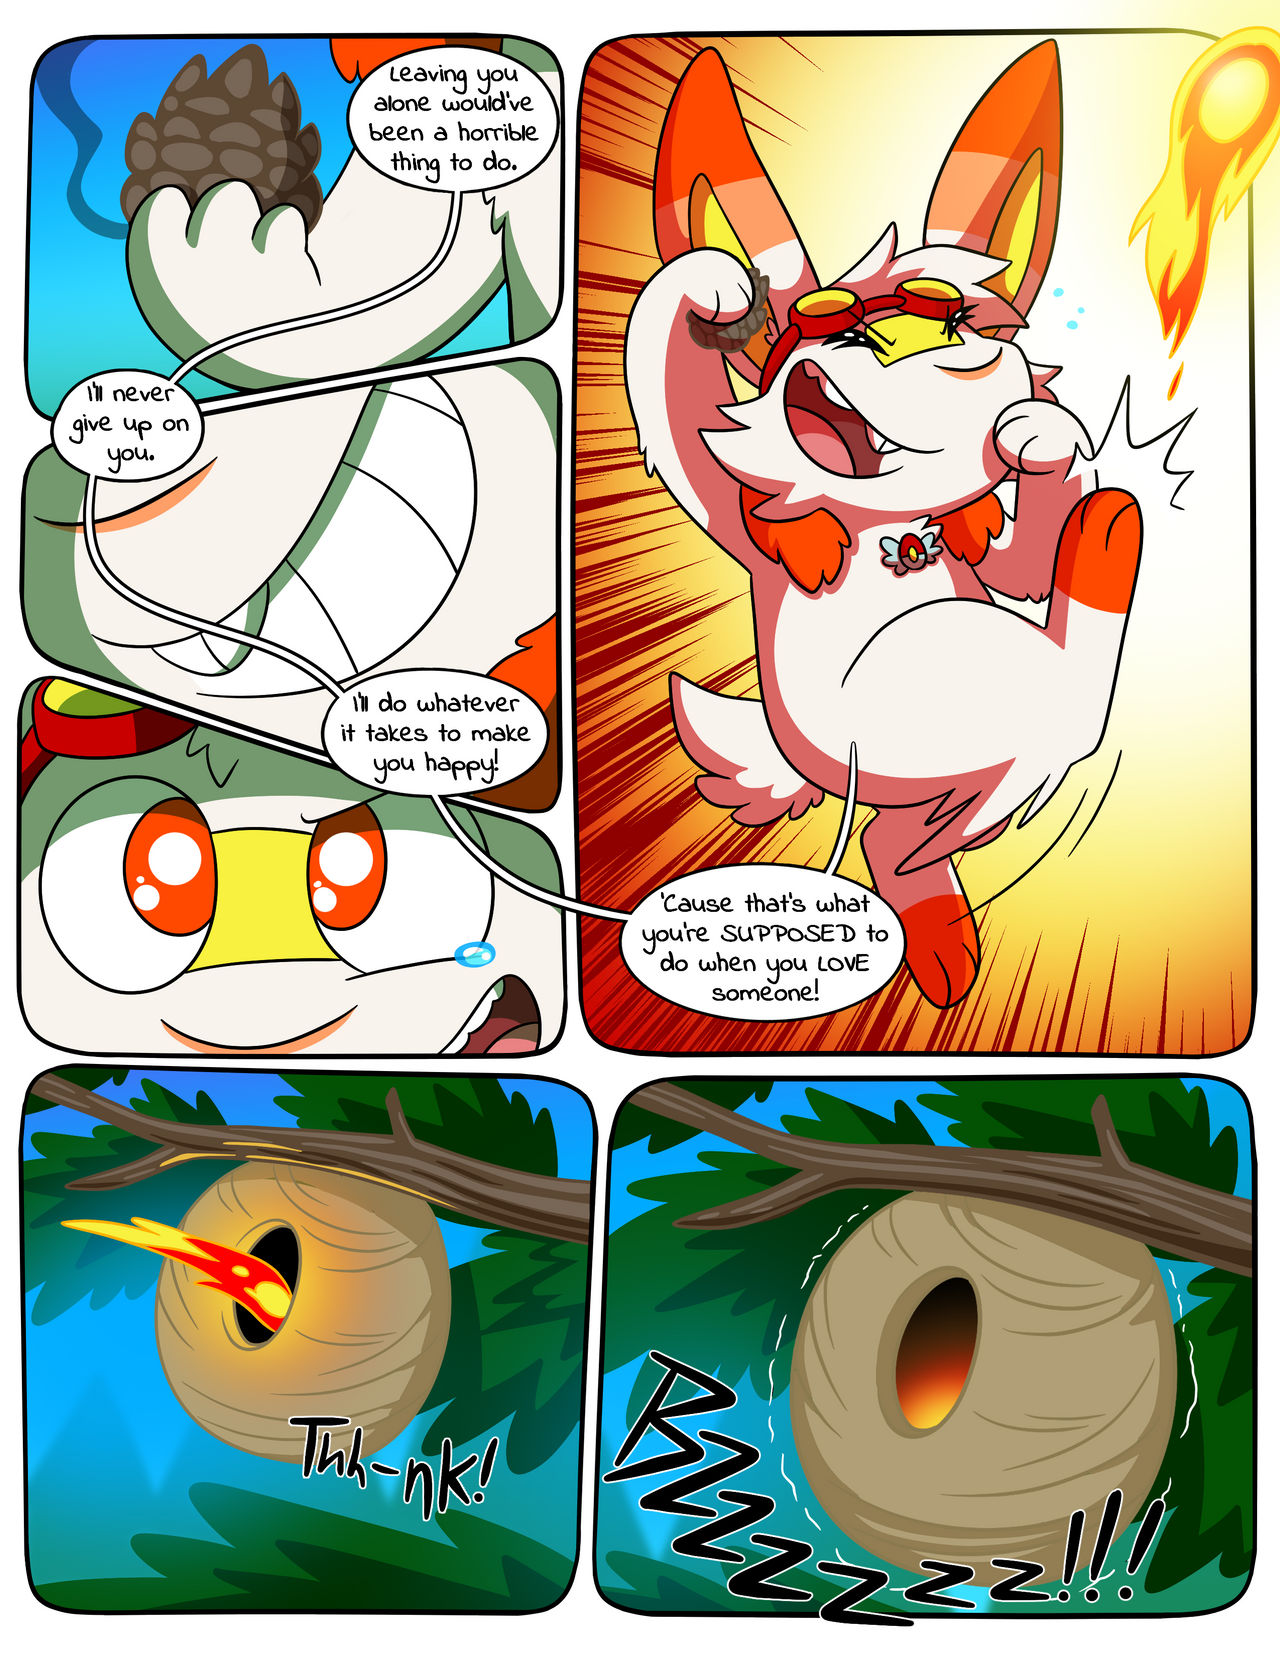 little_lapses__chapter_4__page_17_by_saltnpepperbunny_dfb5n1a-fullview.jpg